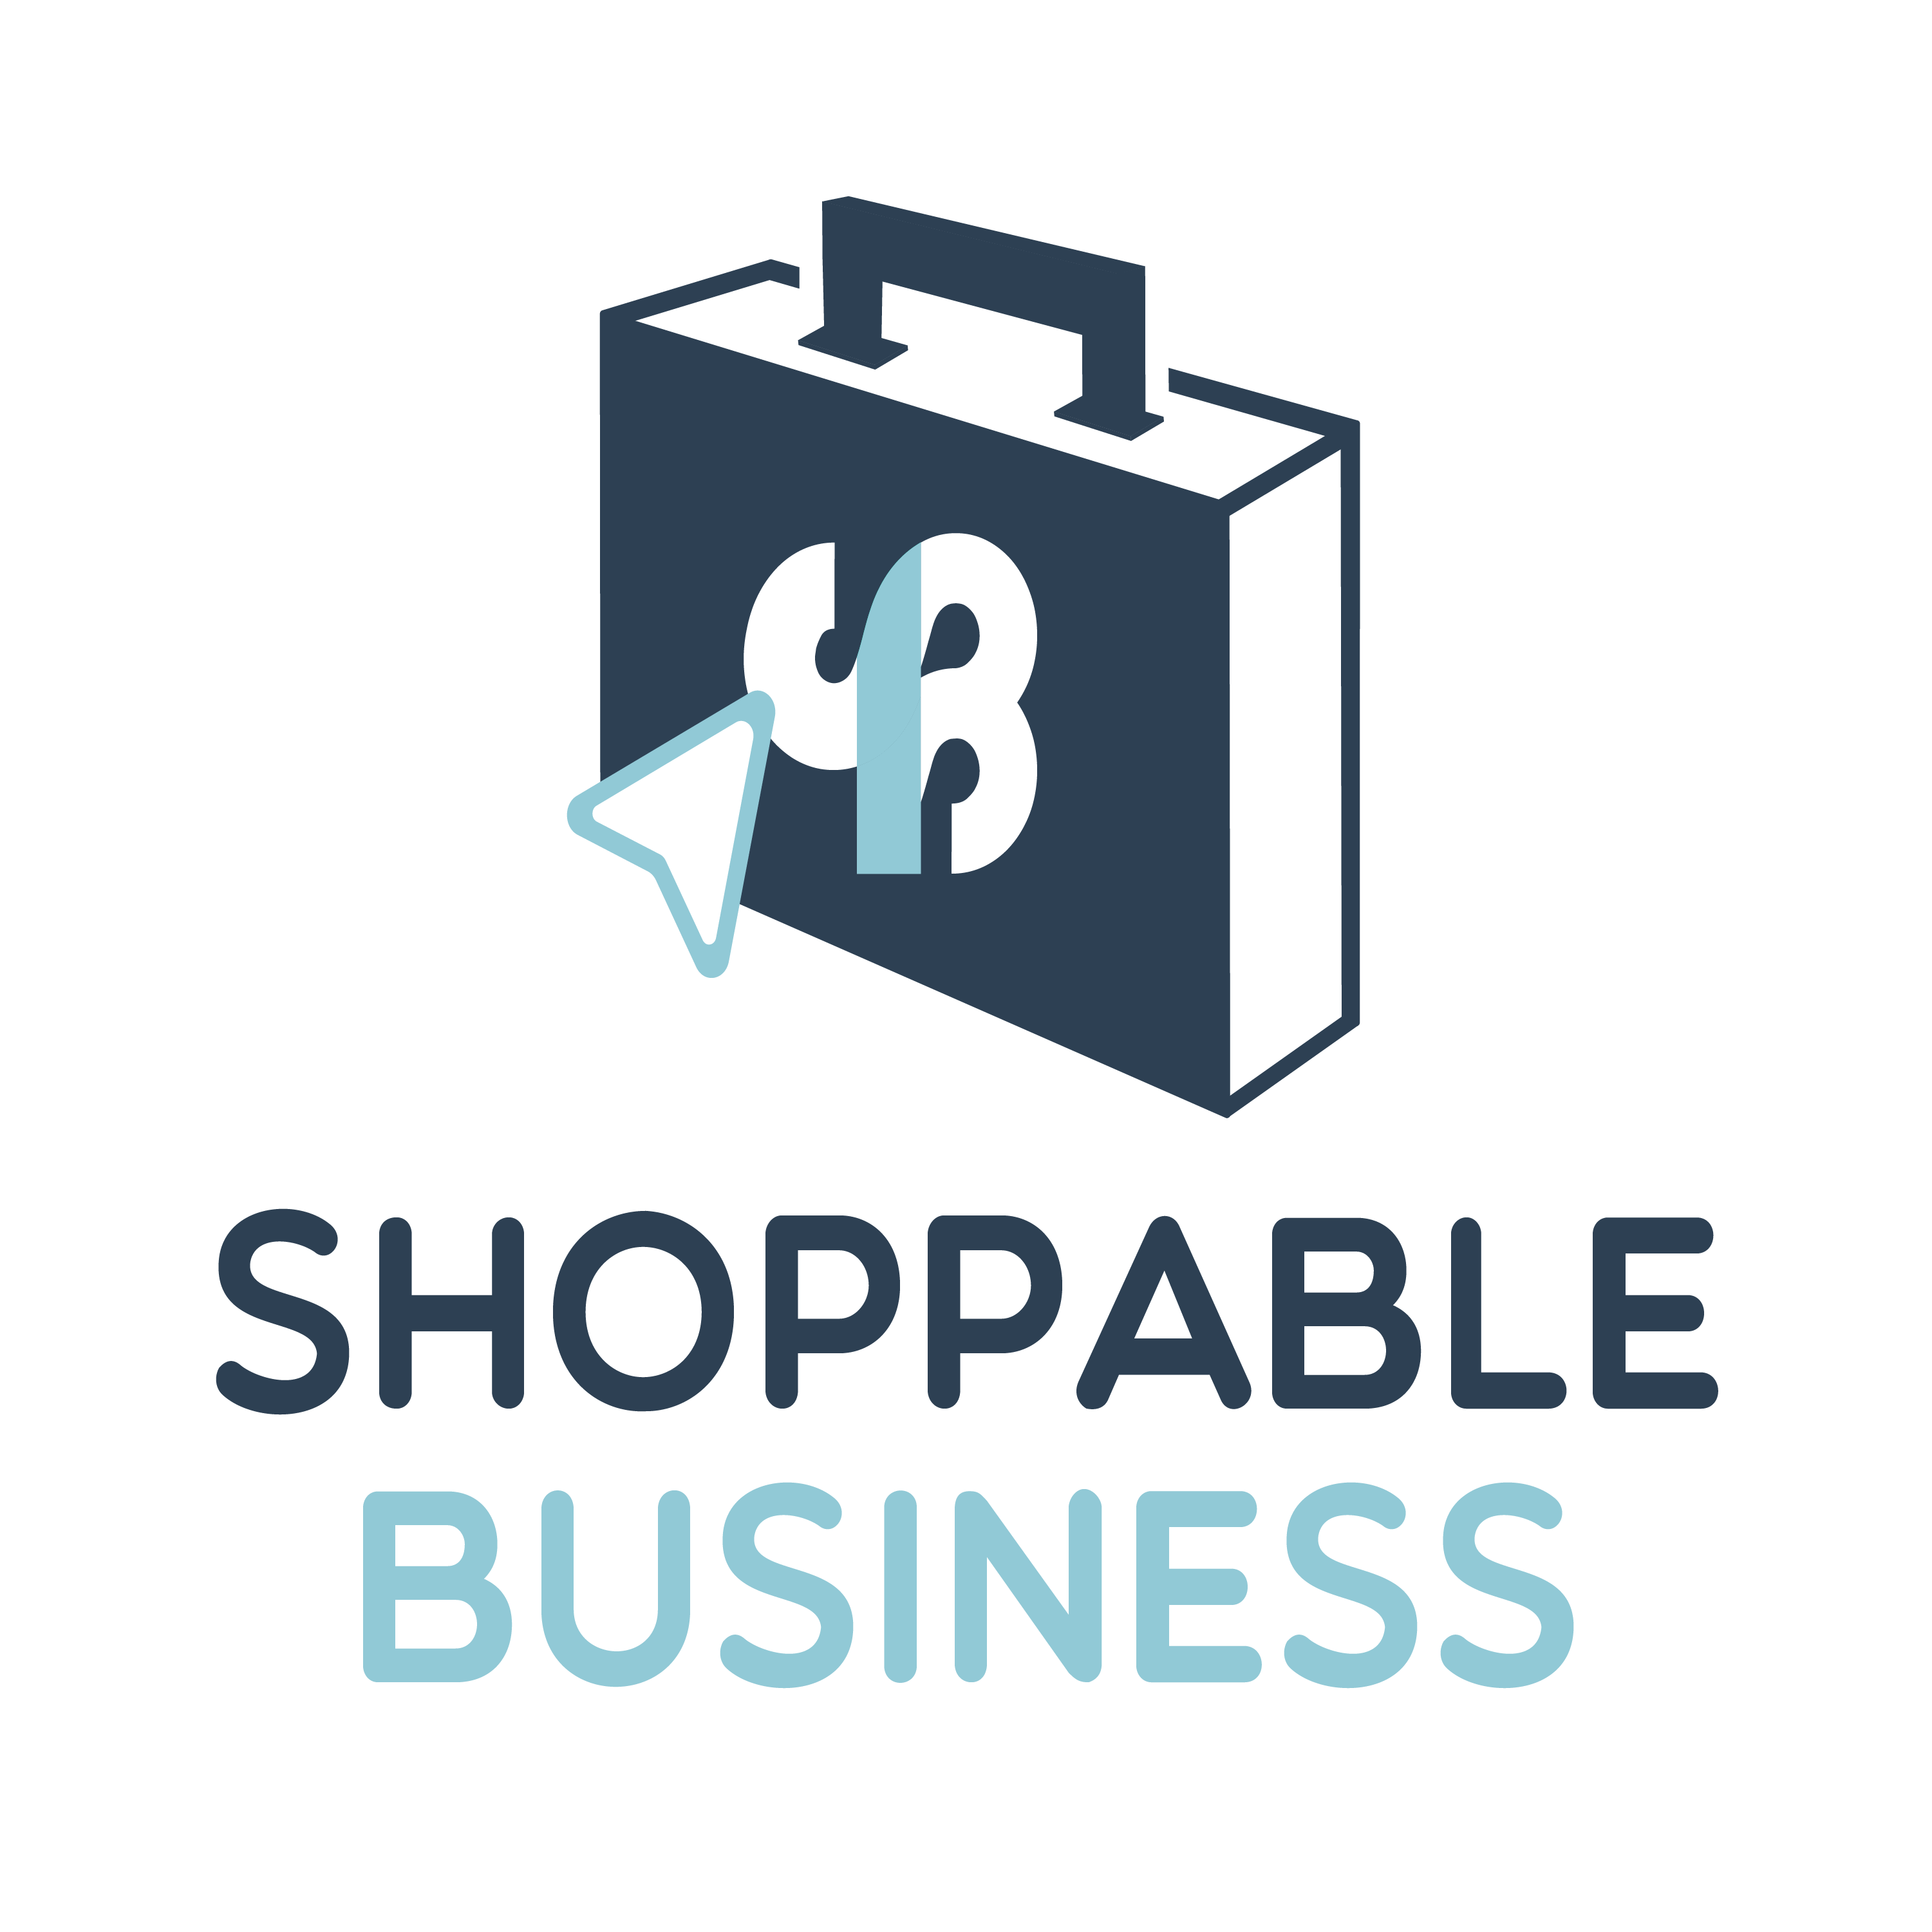 Shoppable Business: The #1 B2B Marketplace in the Philippines